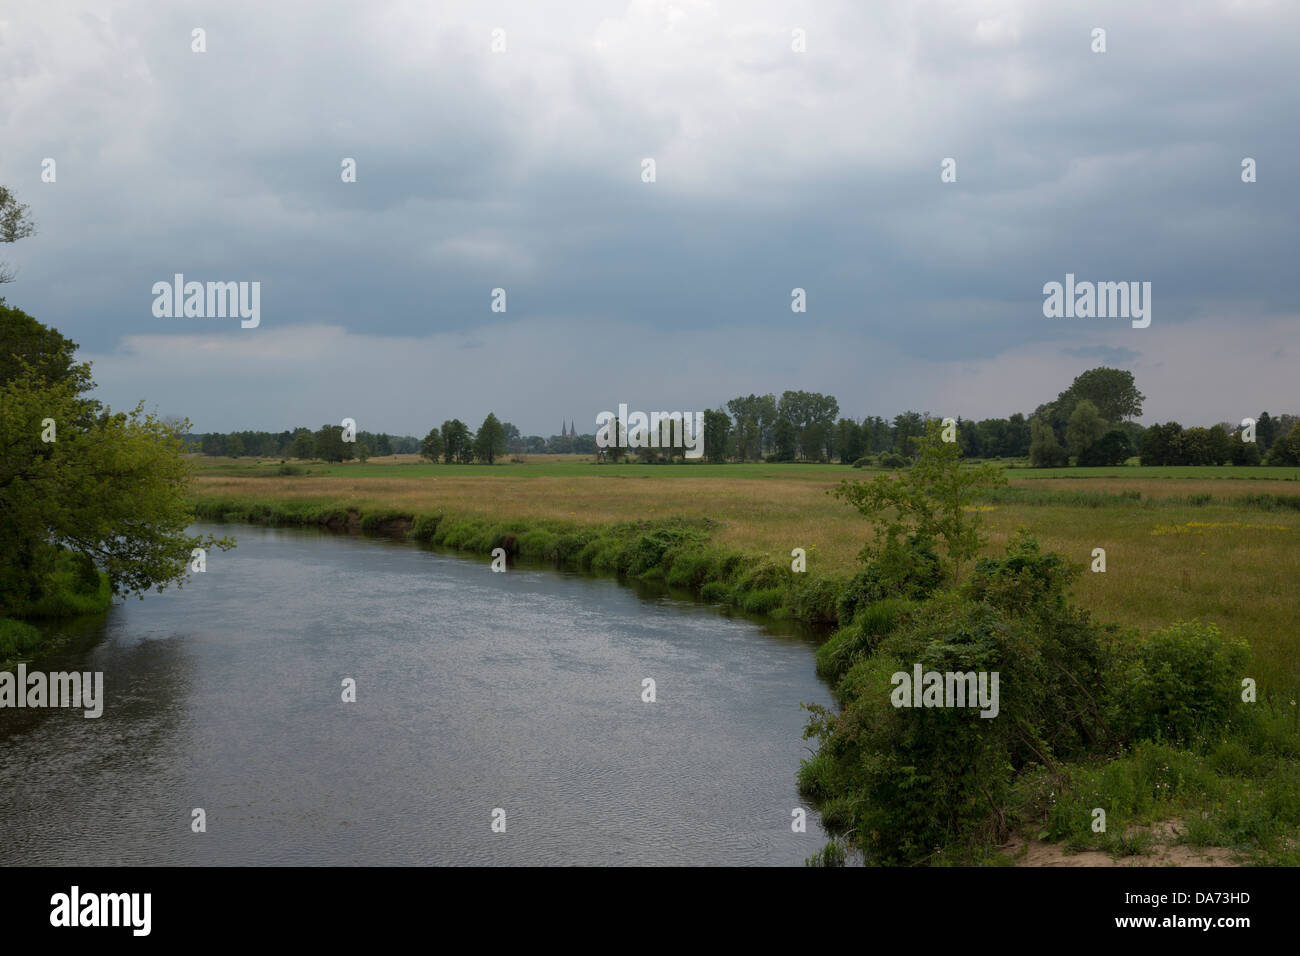 Liwiec river in Poland Stock Photo